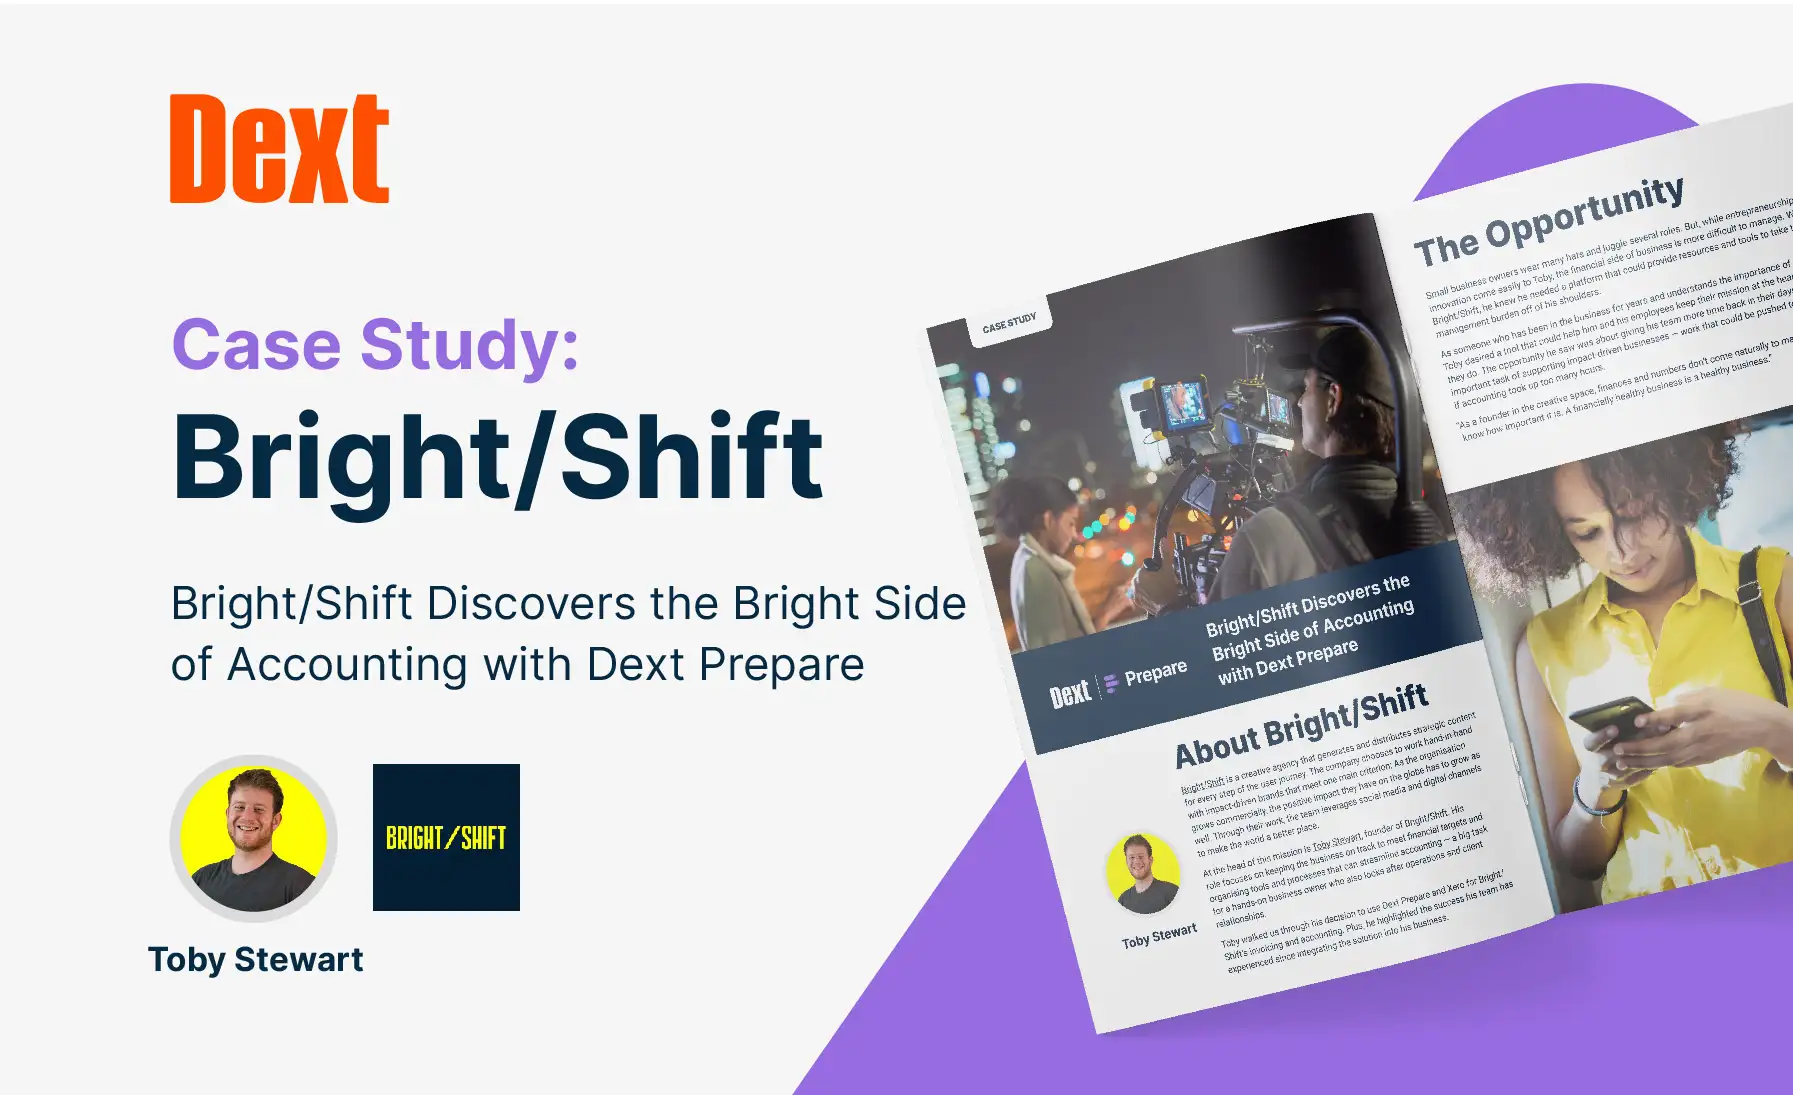 Bright/Shift Discovers the Bright Side of Accounting with Dext Prepare logo